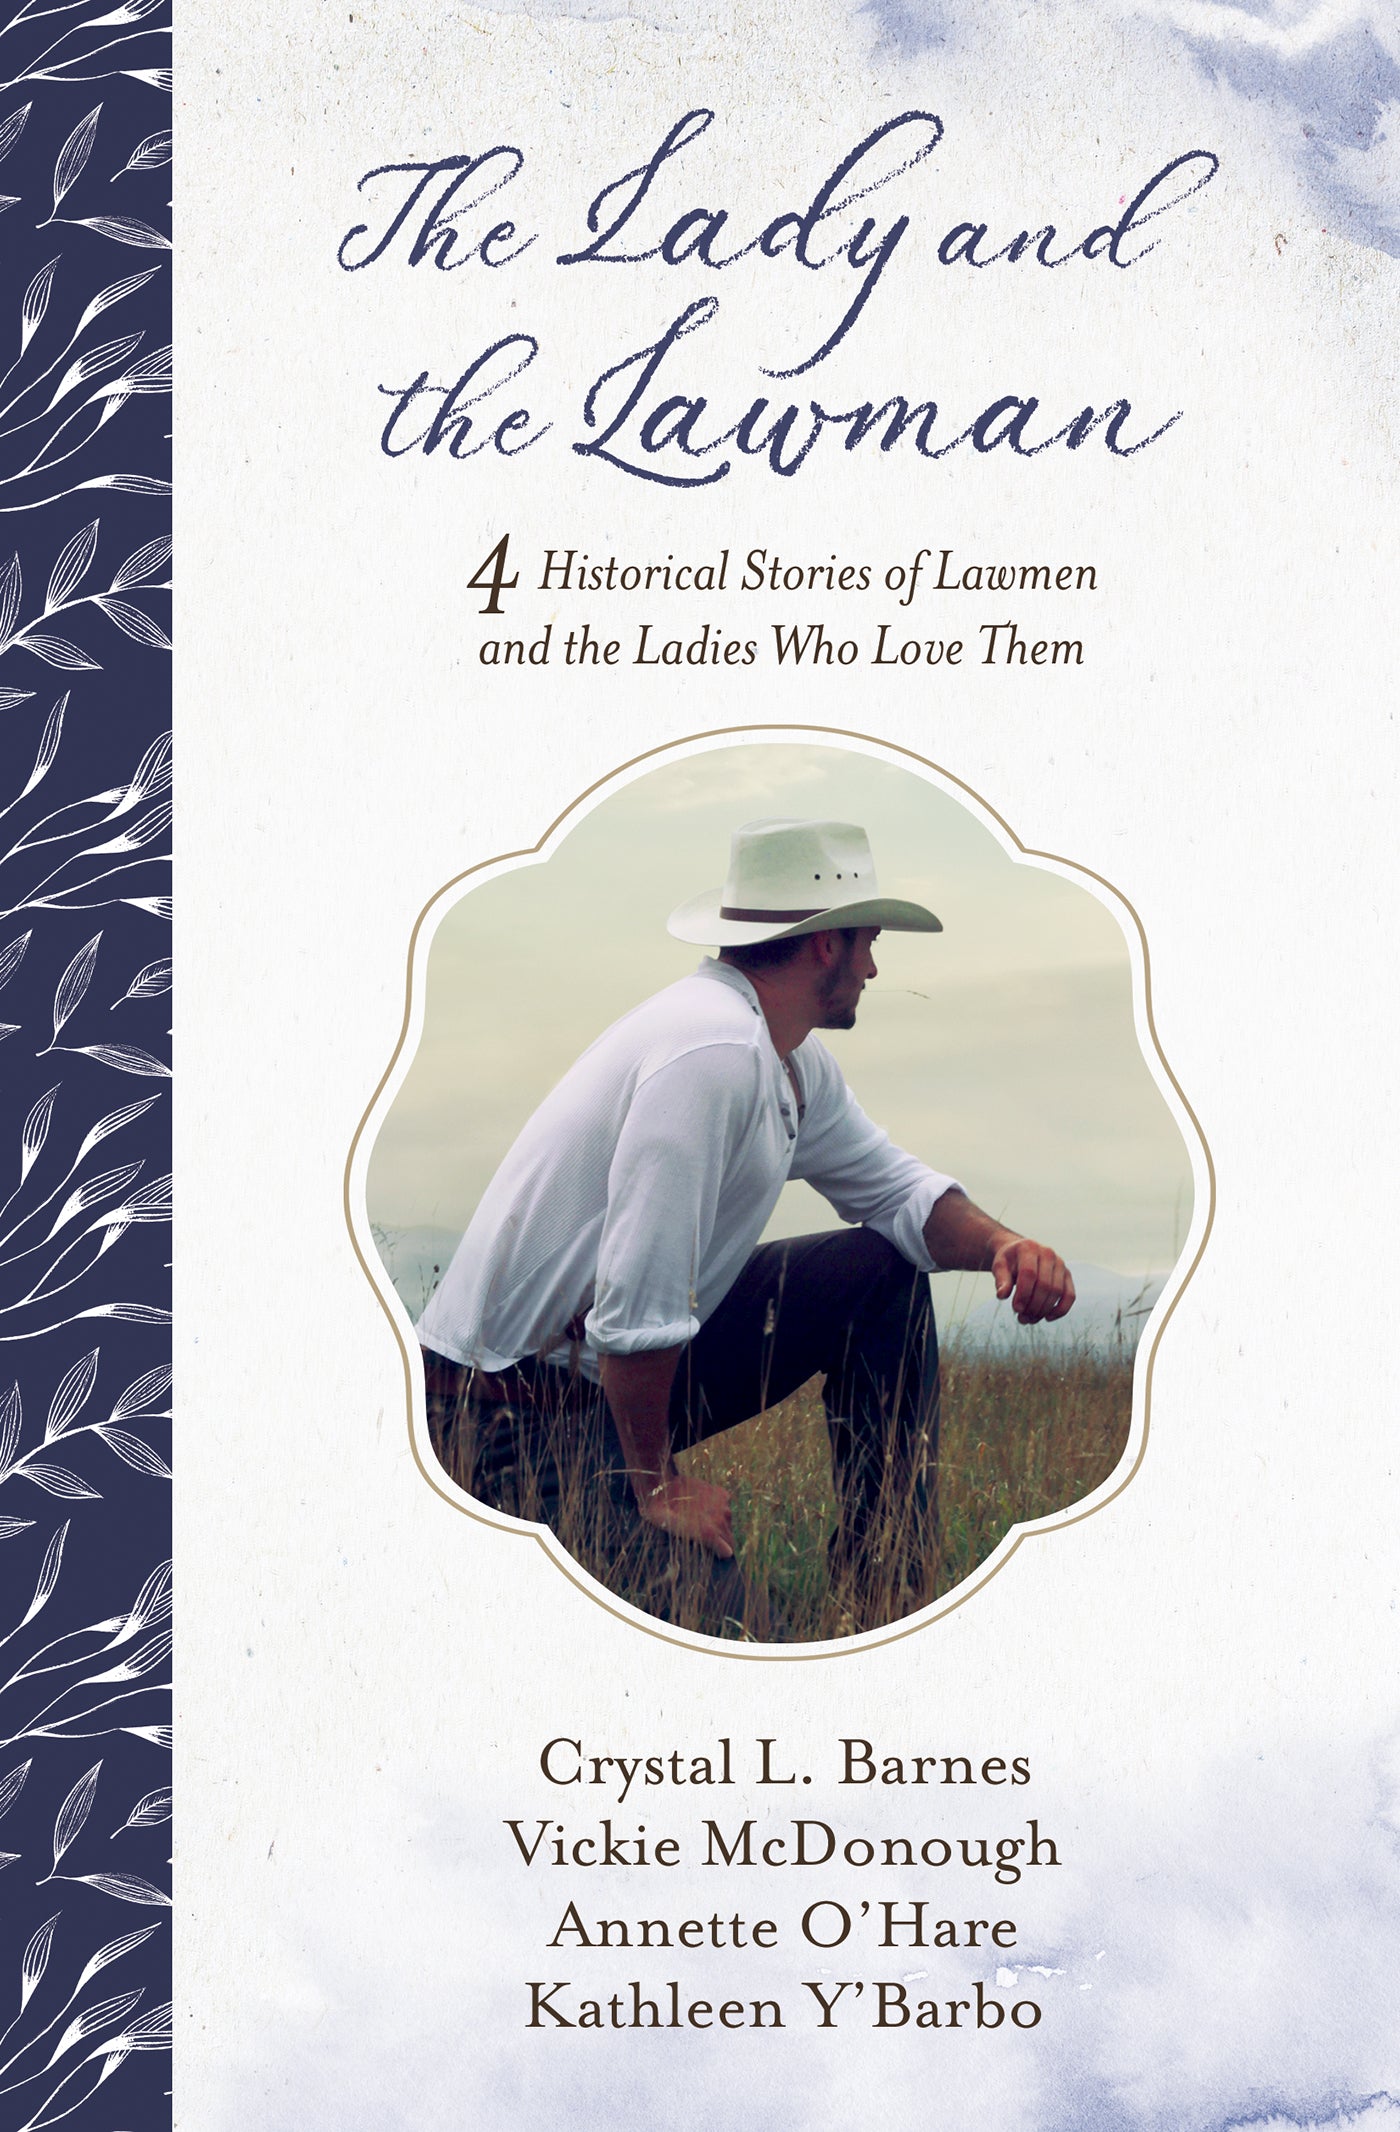 The Lady and the Lawman - The Christian Gift Company